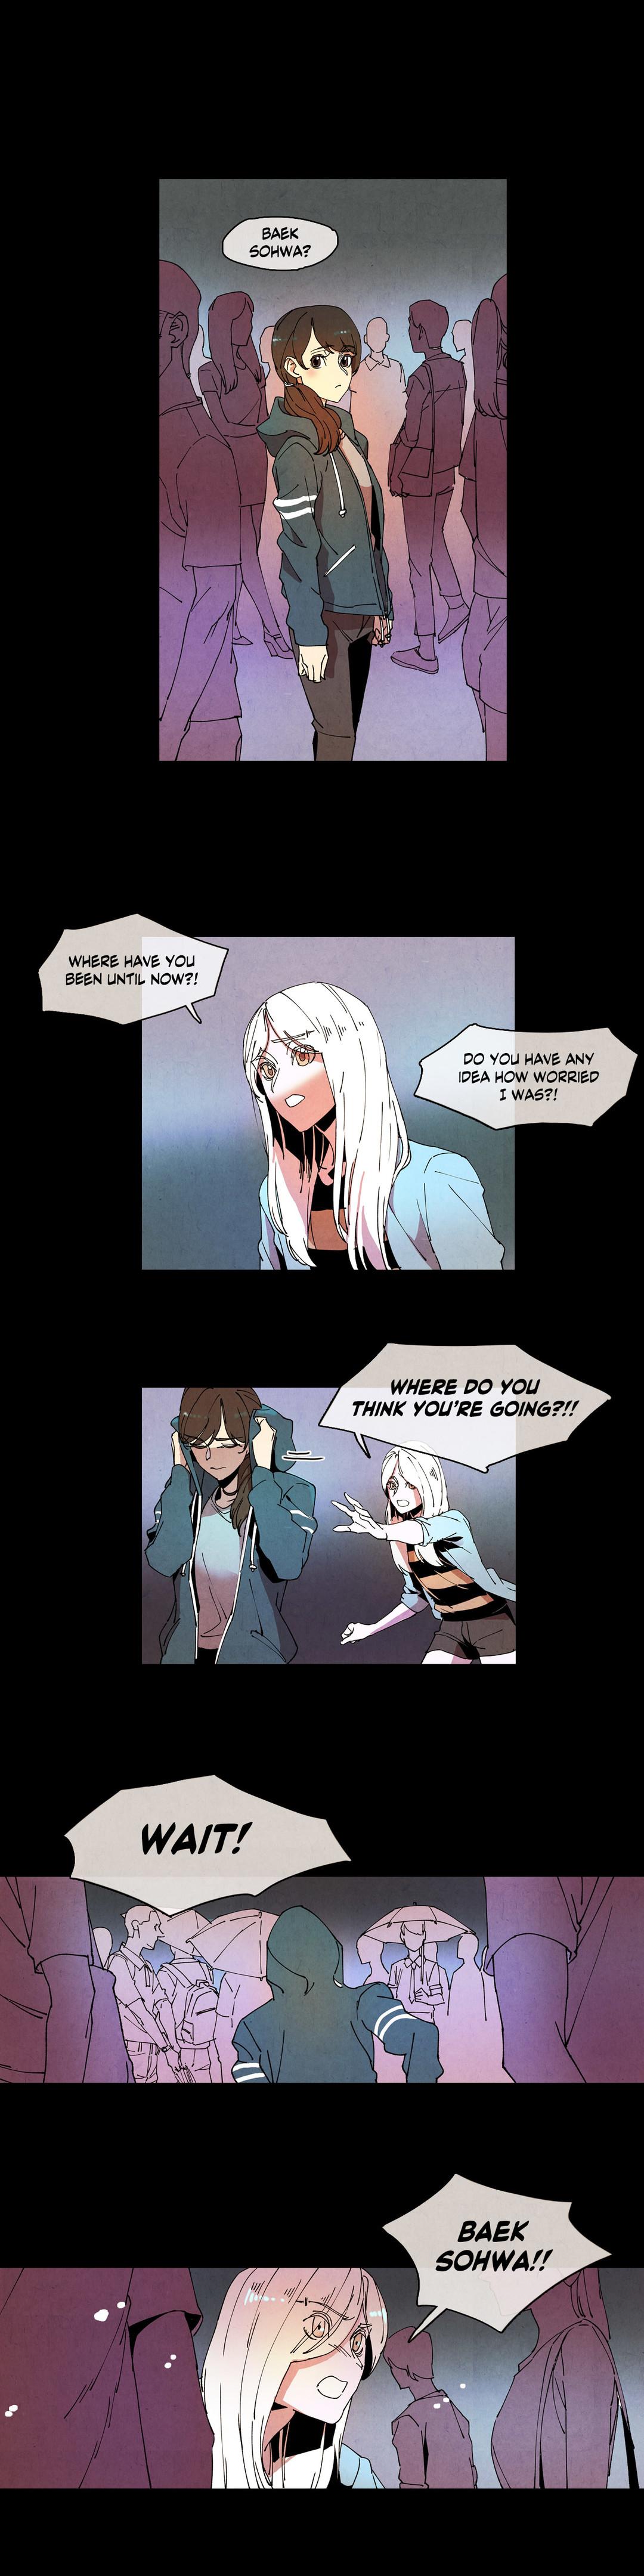 White Angels Have No Wings - Page 1